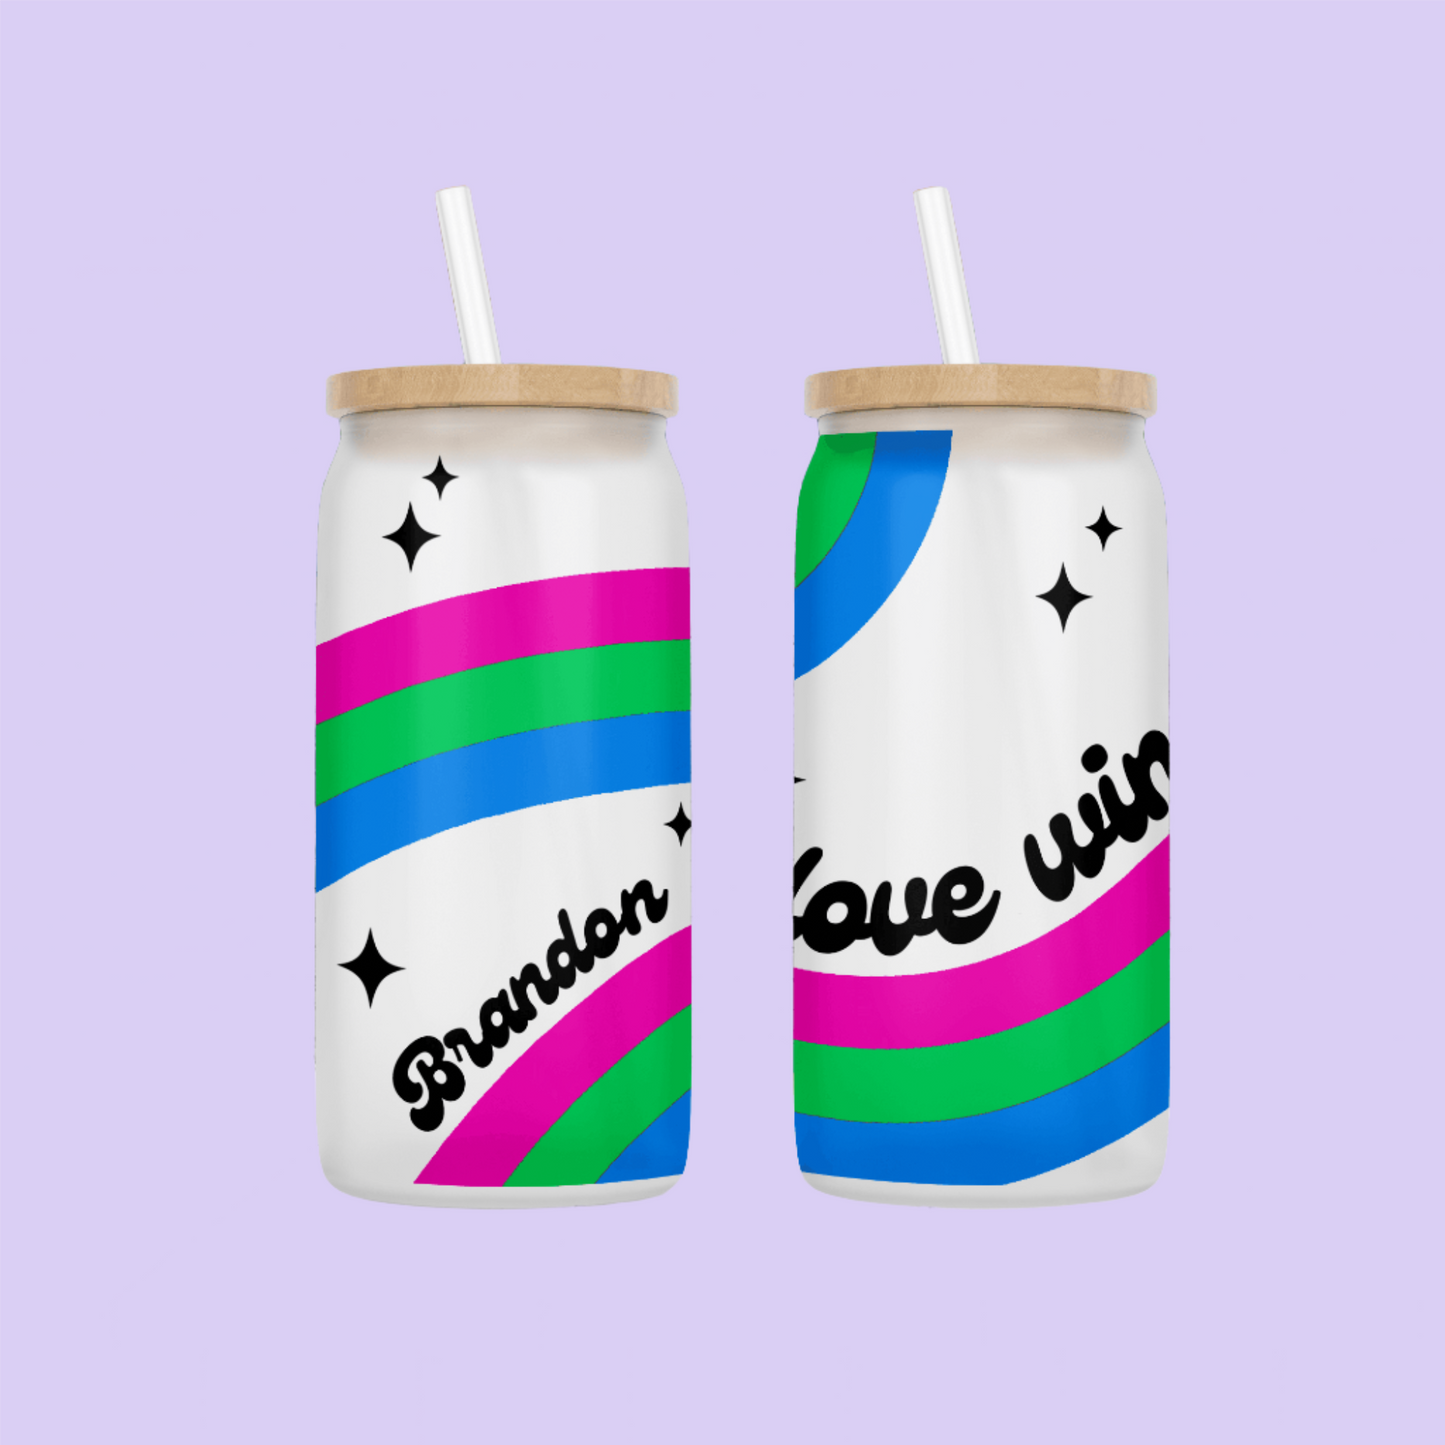 Polysexual Flag "Love Wins" Drinking Glass - Two Crafty Gays